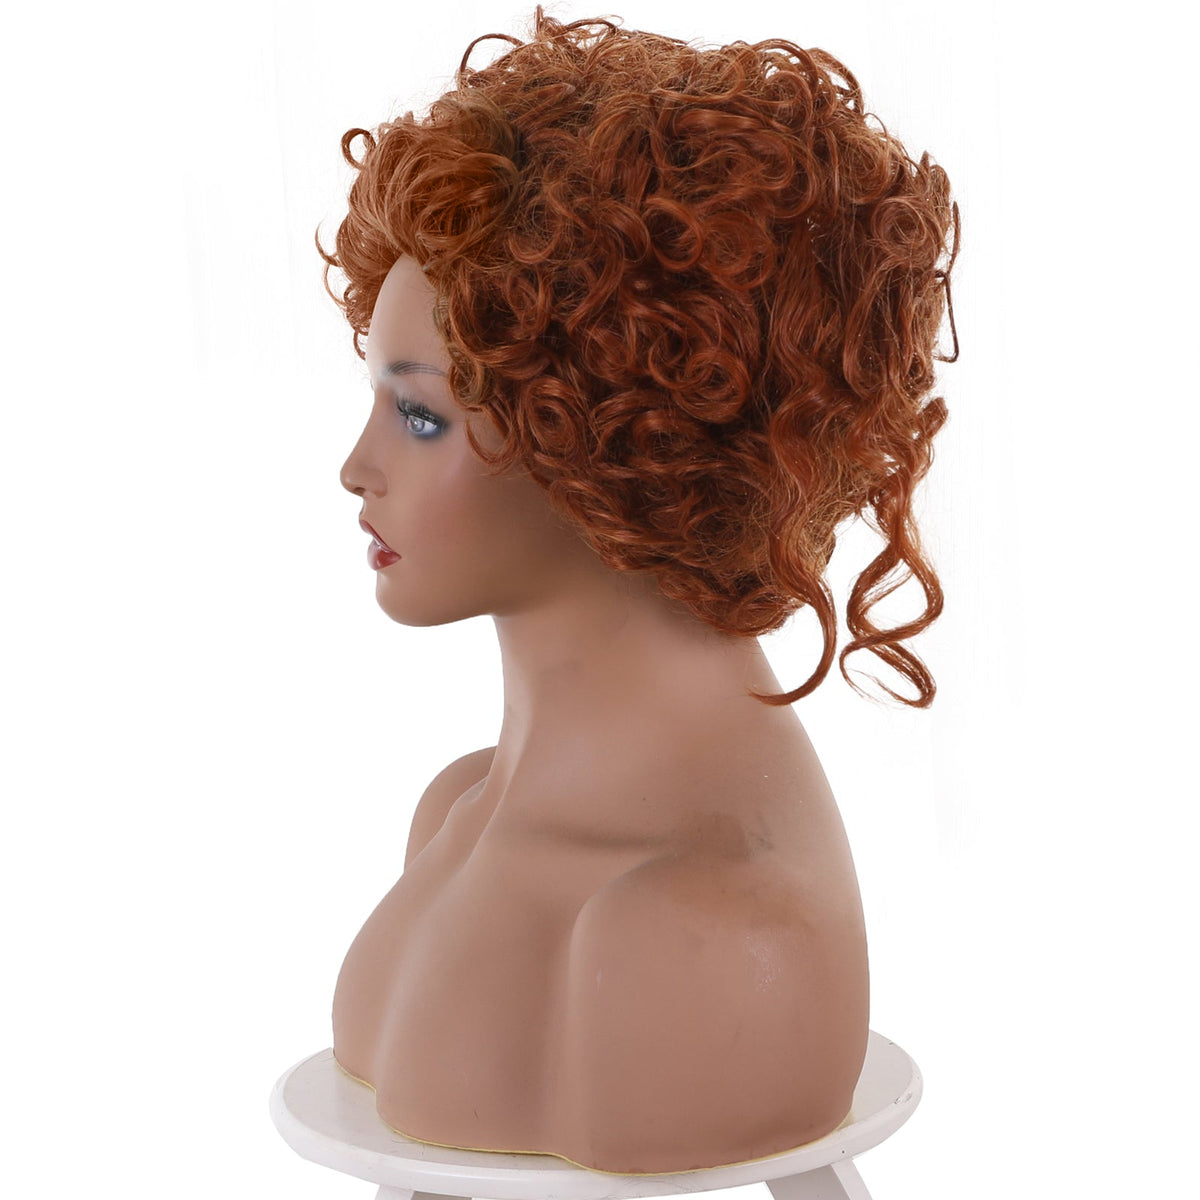 Hocus Pocus 2 Winifred Sanderson heart-shaped Brown short Movie Cosplay Halloween cosplay Wig Special Wig